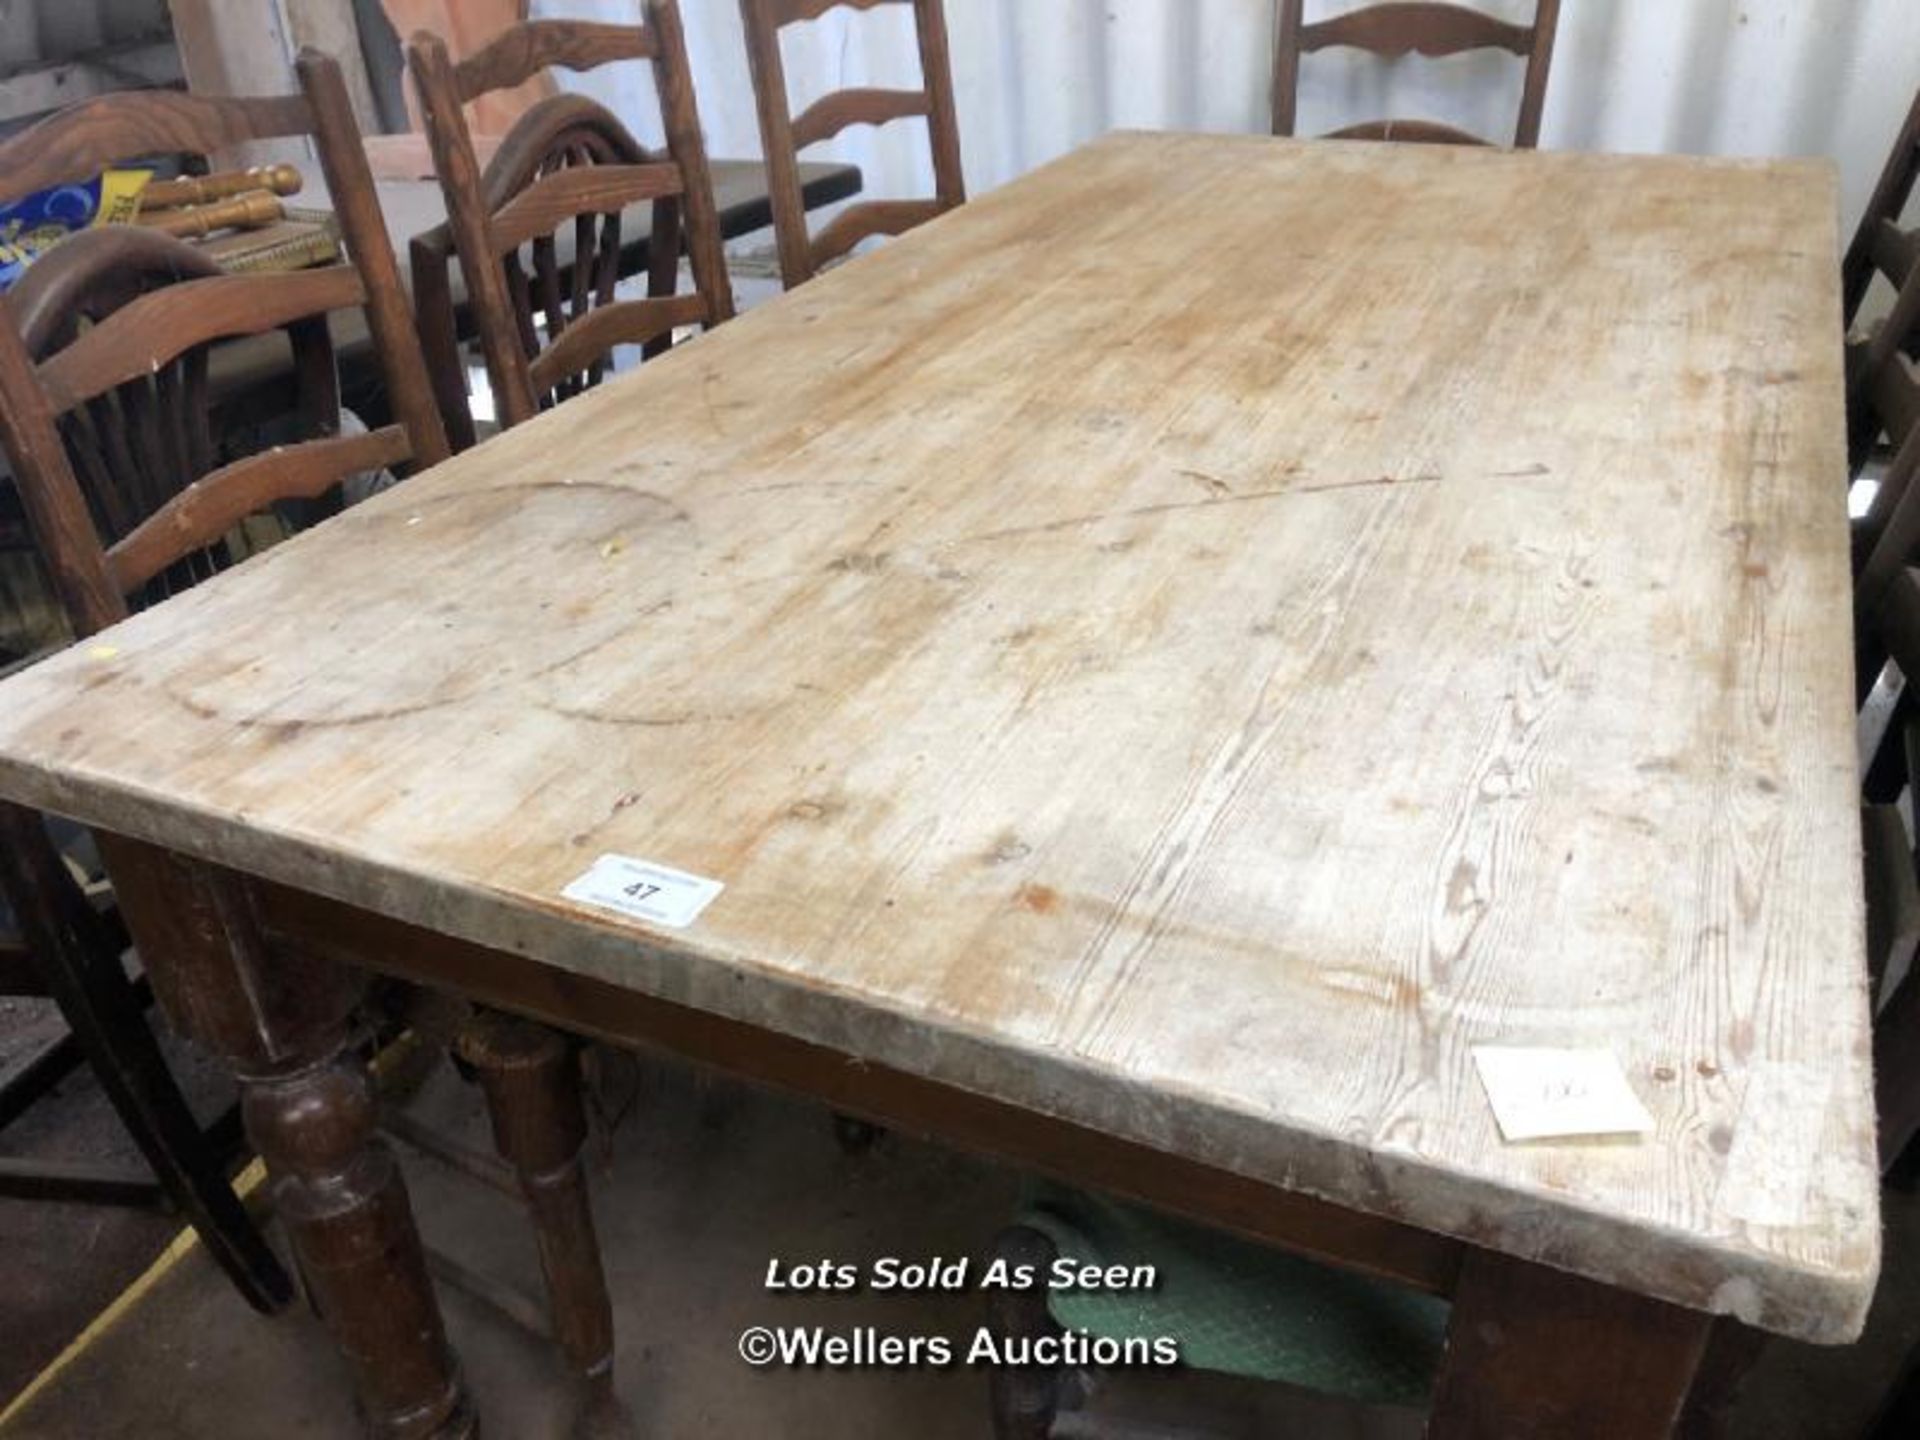 LARGE OAK REFECTORY TABLE, 72 X 36 X 30.5 INCHES / LOCATED AT VICTORIA ANTIQUES, WADEBRIDGE, PL27 - Image 2 of 3